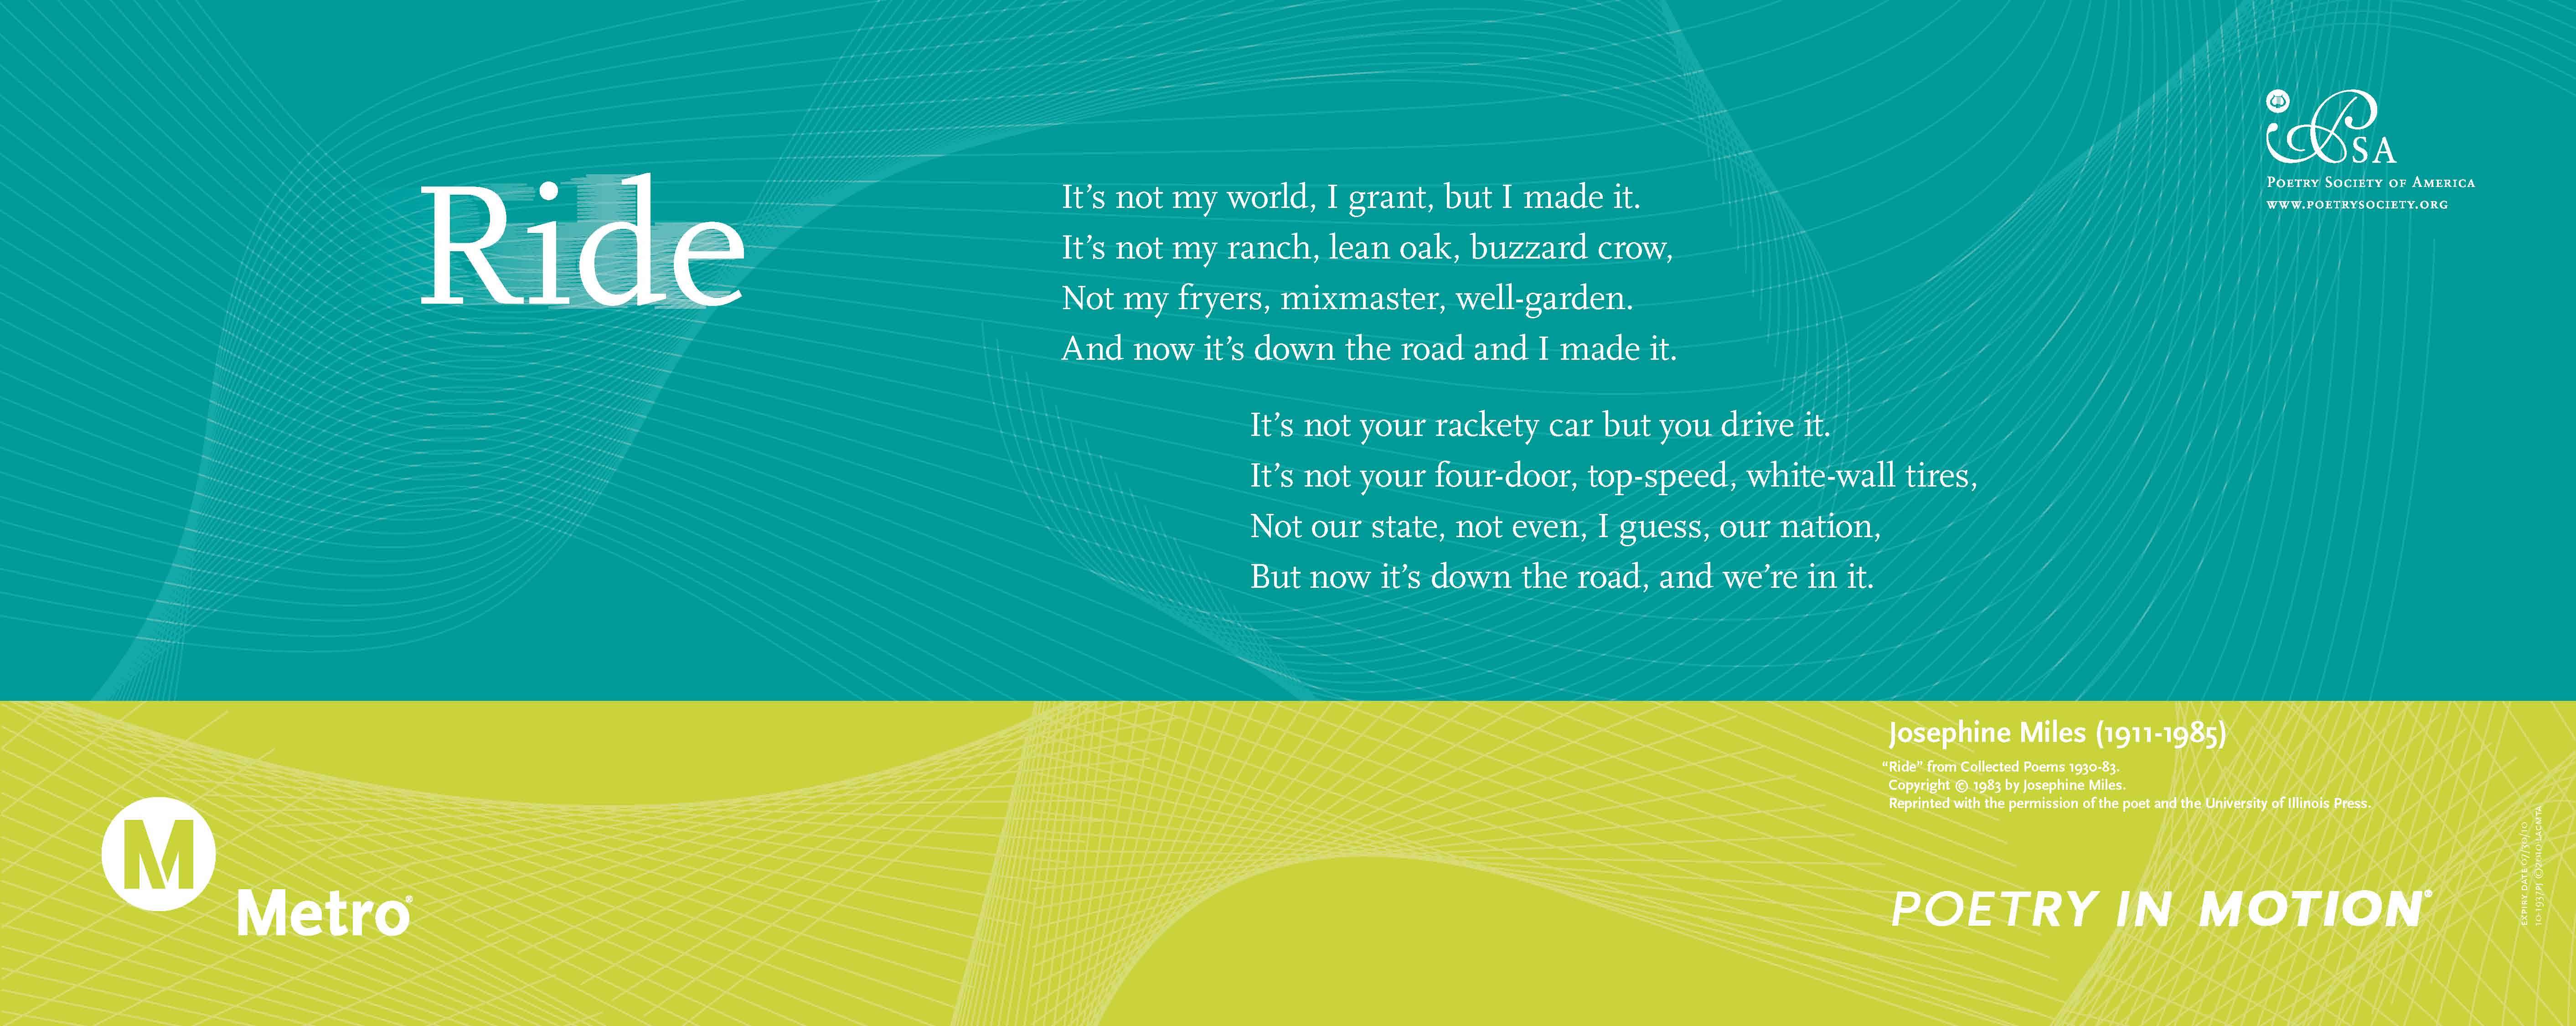 A teal and lime green poster features a poem titled Ride, by Josephine Miles.